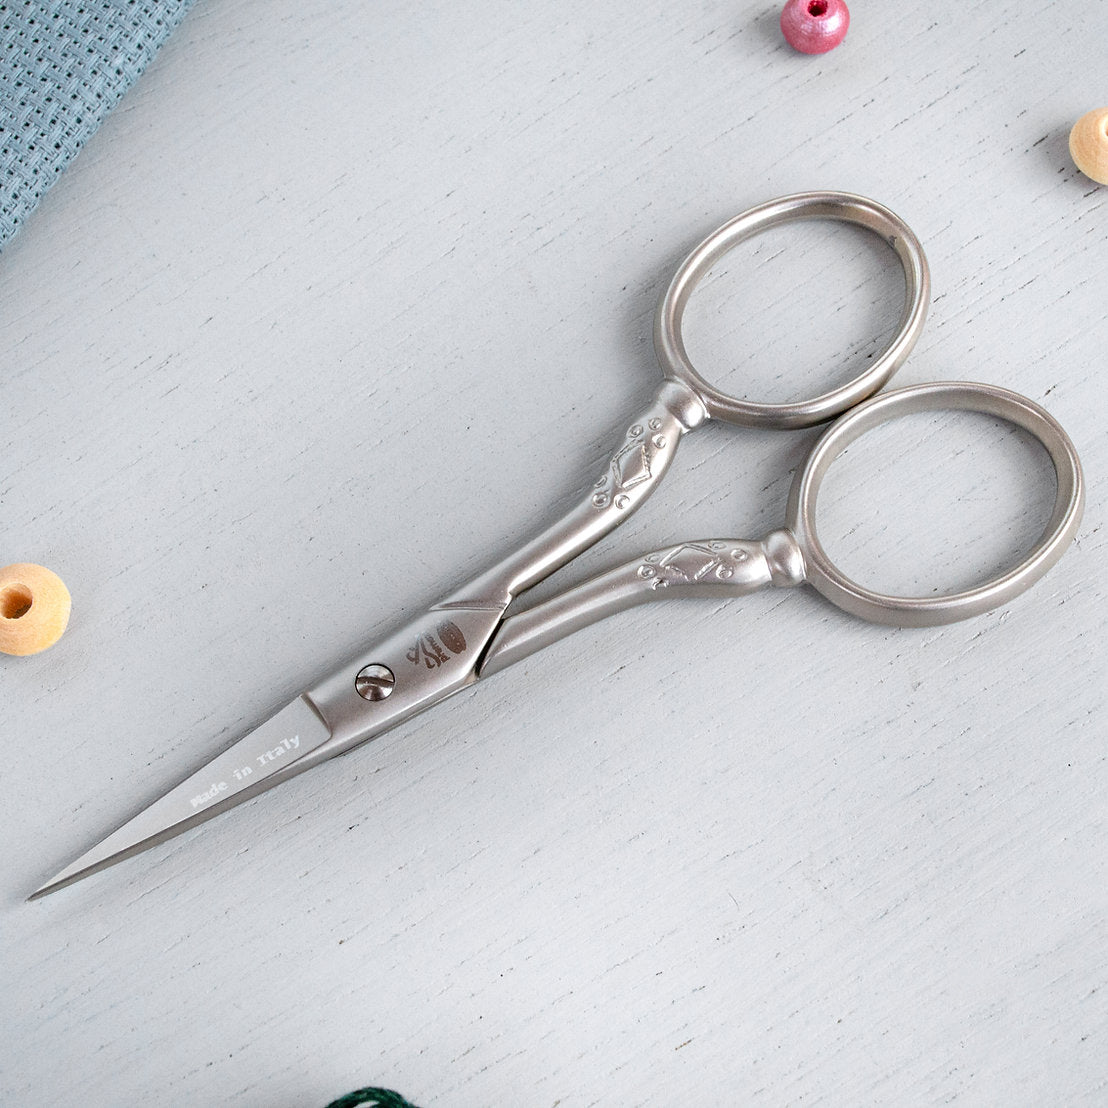 Embroidery Scissors 9 cm Croma Collection by Premax 10380: Quality and Precision in your Sewing and Embroidery Projects